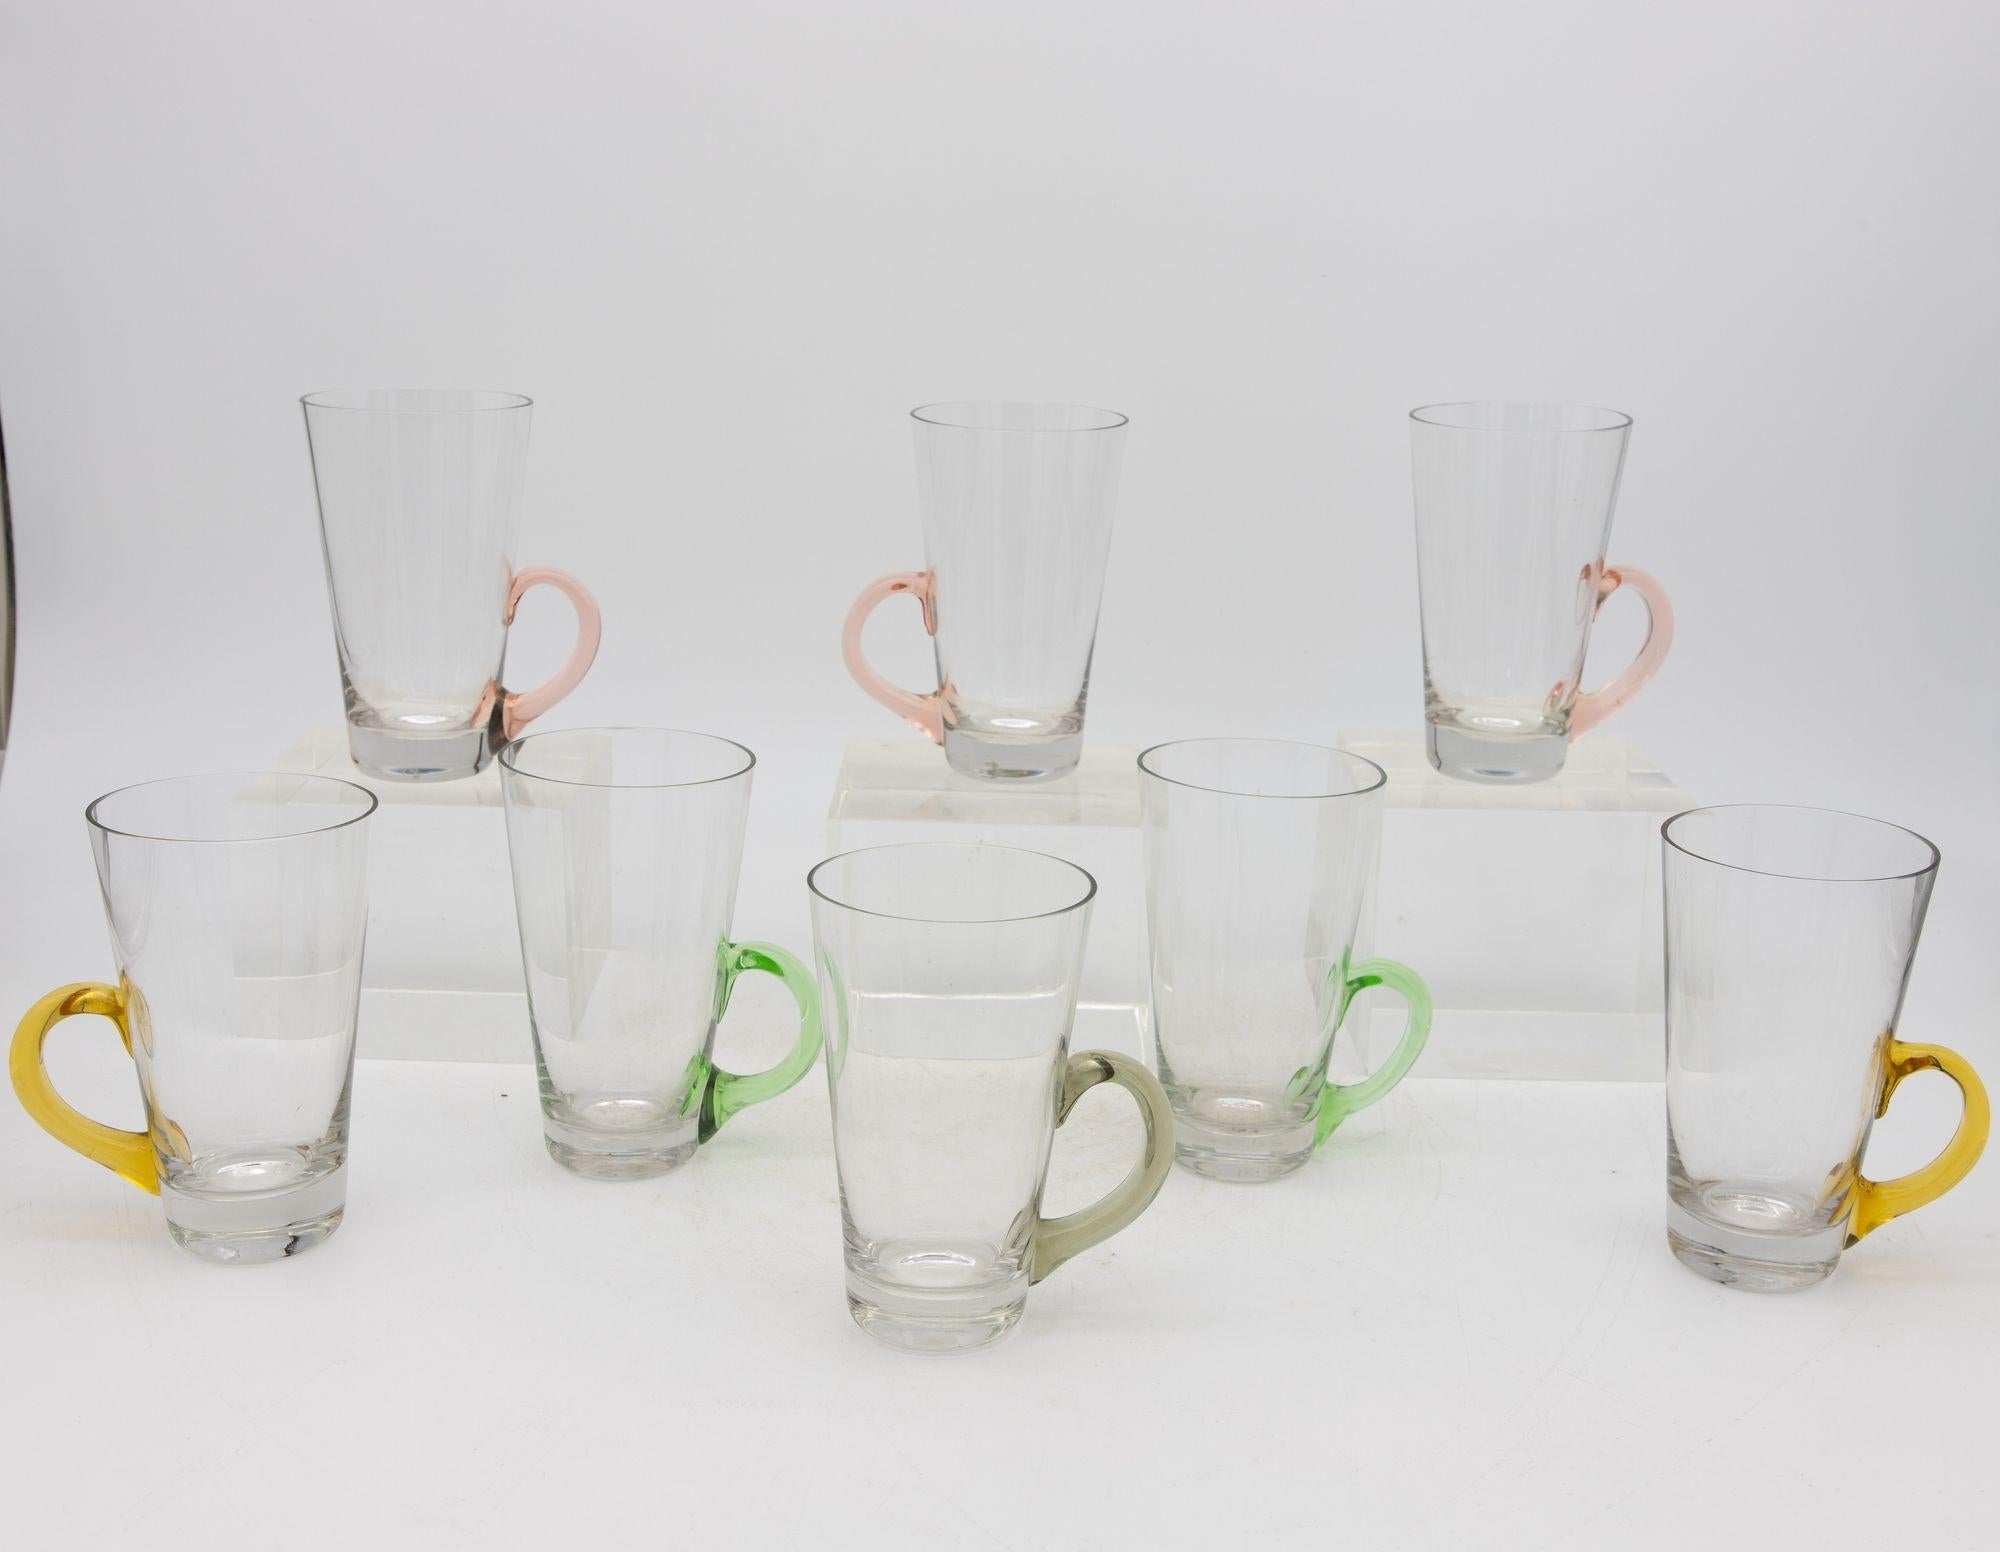 A delightfully whimsical set of eight vintage Hot Toddy glasses. Each glass has a pale pink, yellow, green, or gray handle. Enjoy a classic cocktail by the fire with friends and this set that is made for entertaining. Please note there are three